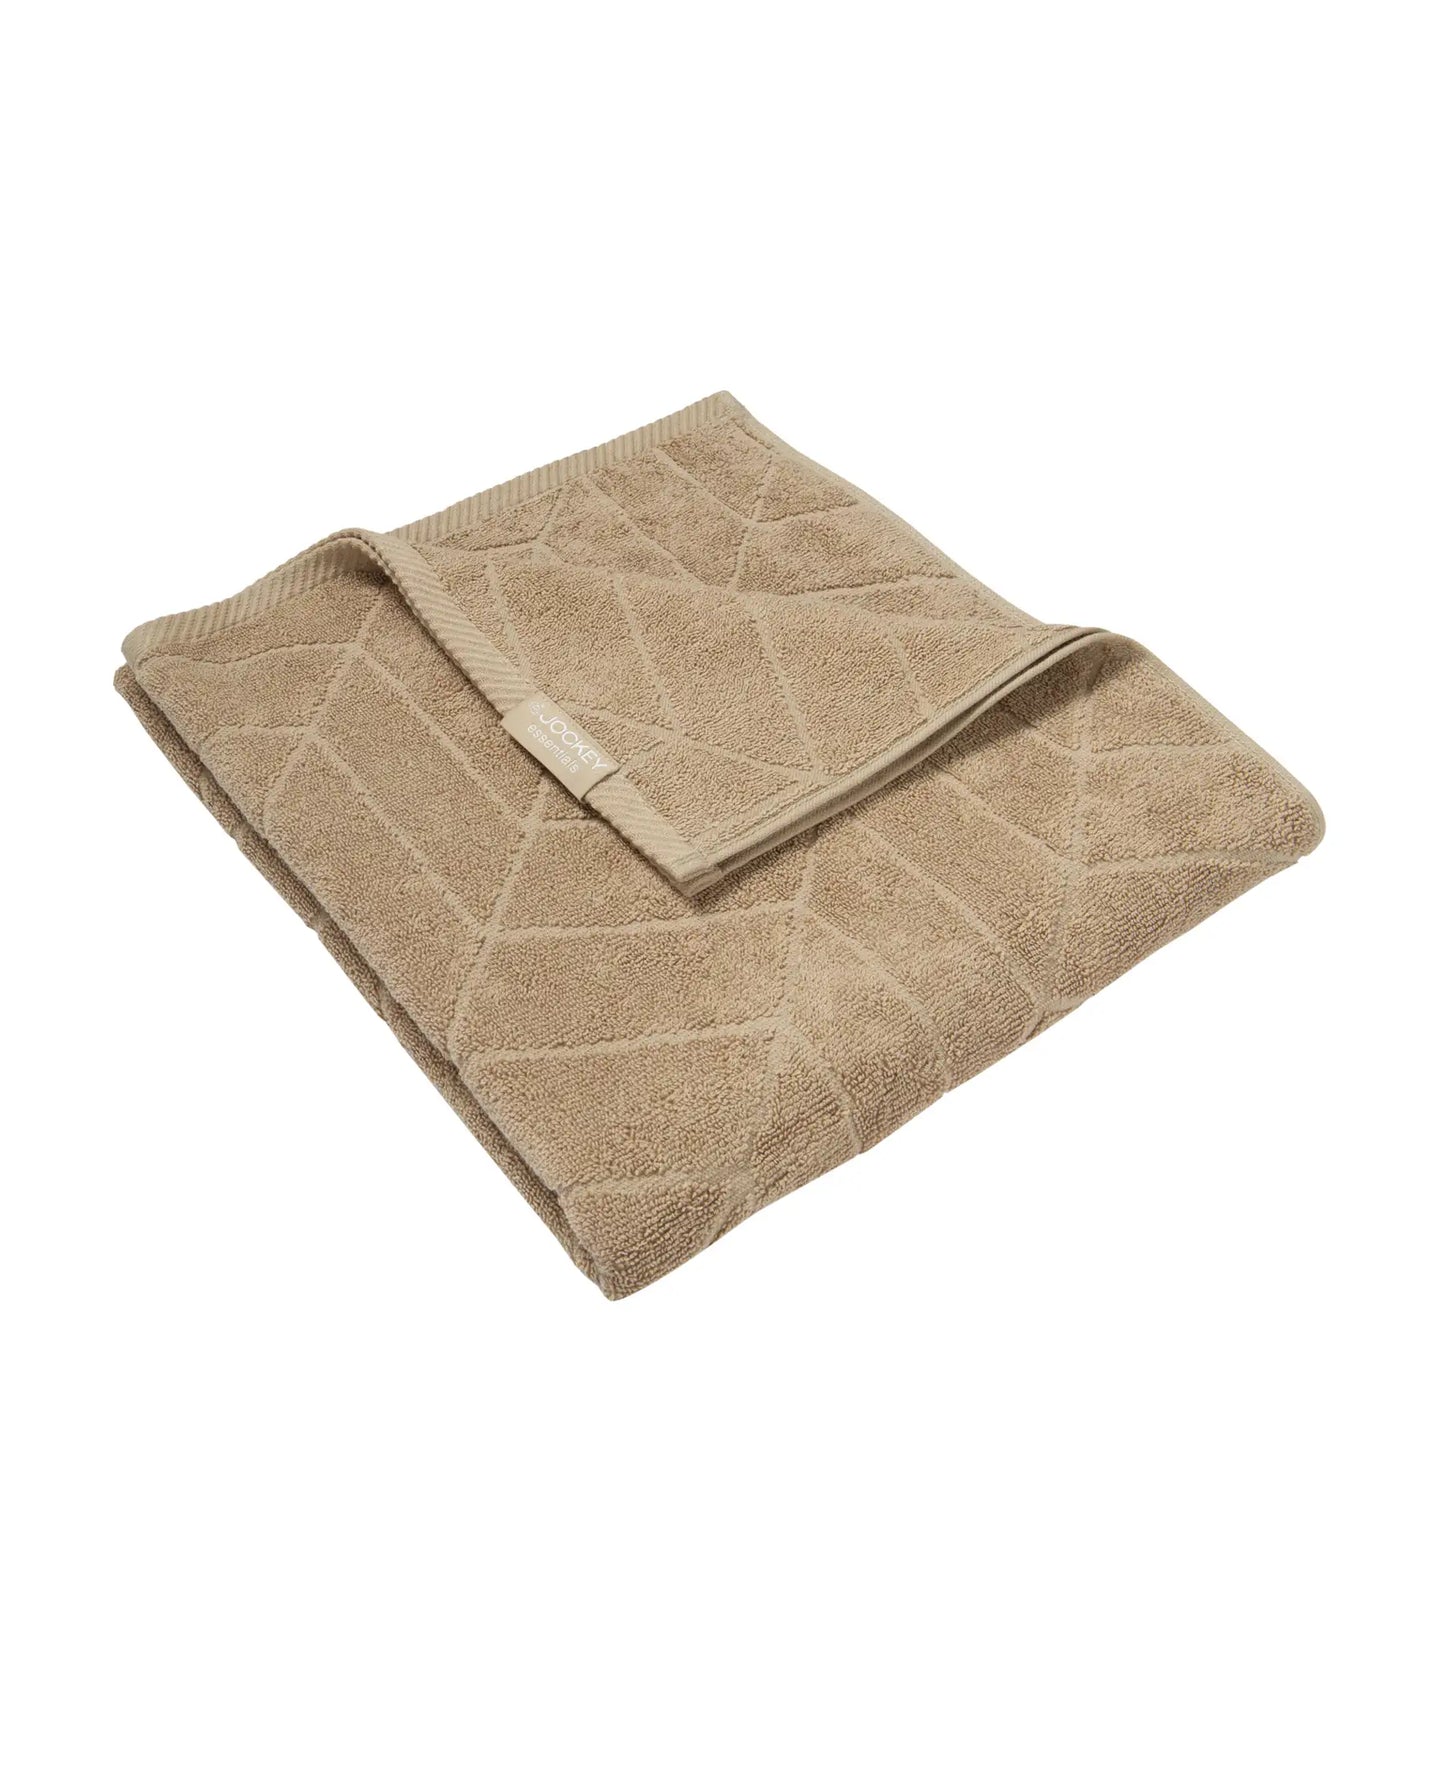 Cotton Terry Ultrasoft and Durable Patterned Bath Towel - Camel-2